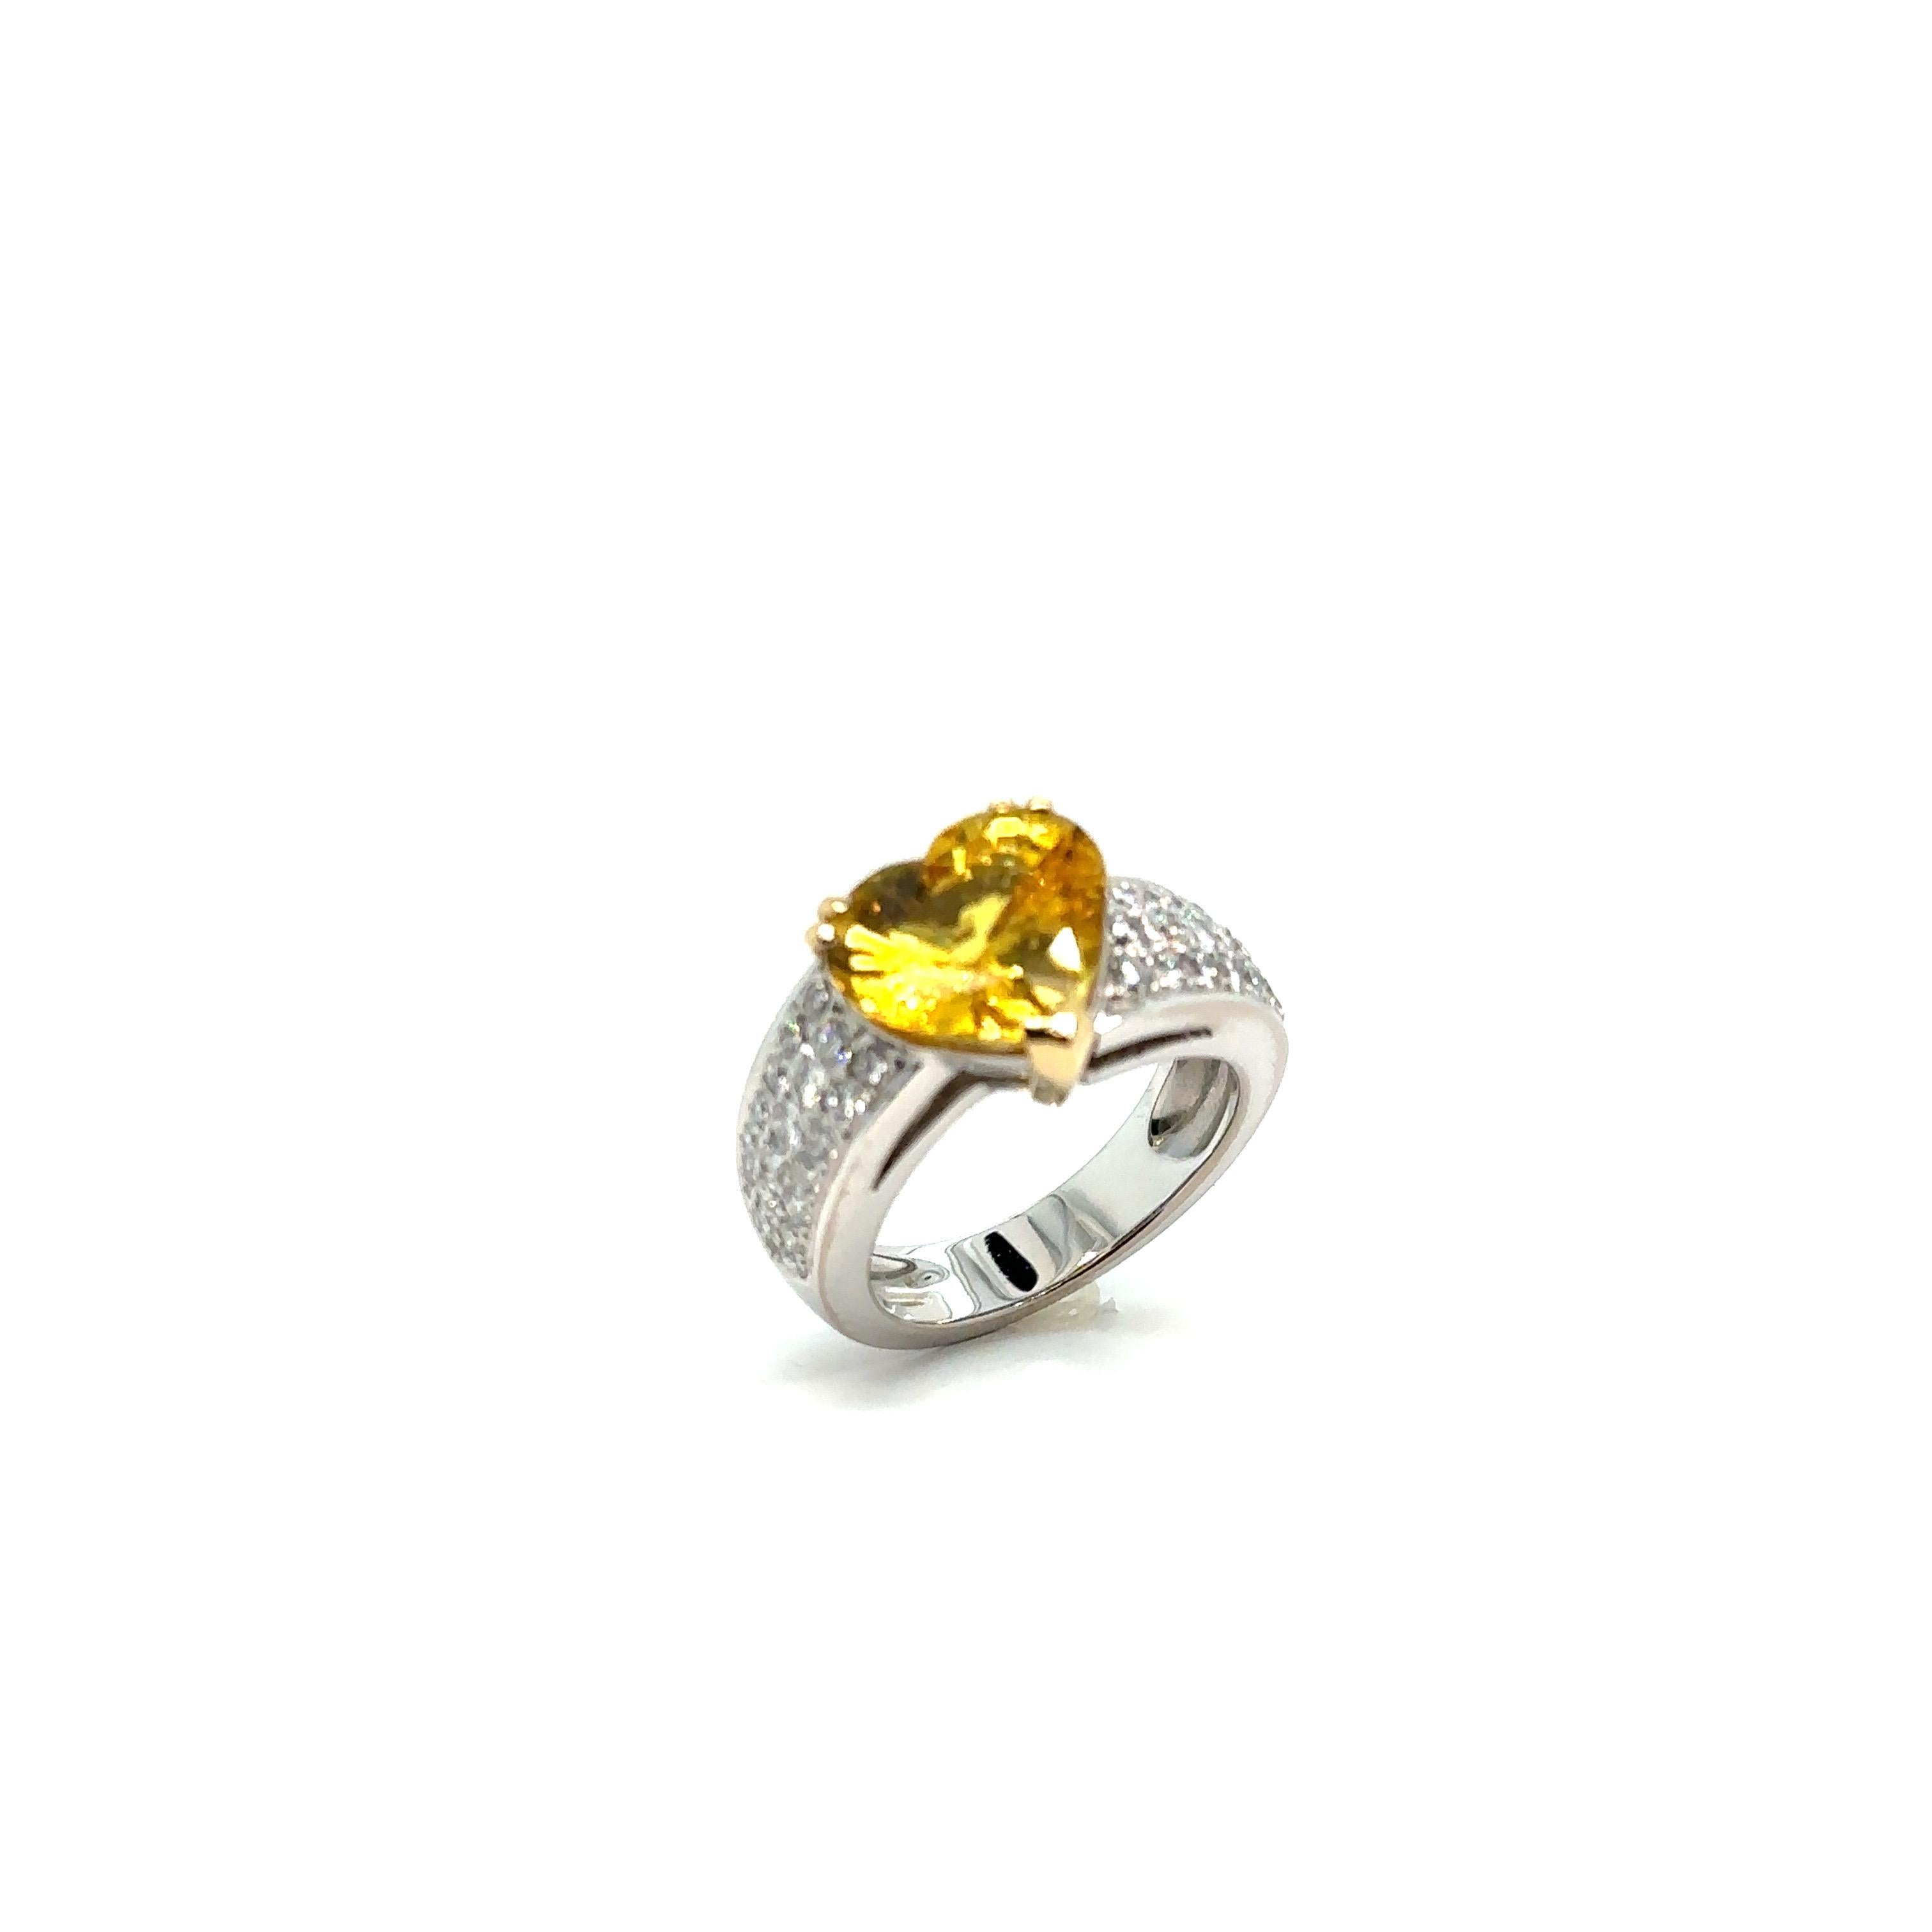 French Ring, Yellow Sapphire Heart, Pavage Diamonds

Ring in 18 karat white gold 750/1000, 11.71 grams, composed of a 5.11 carats yellow sapphire 